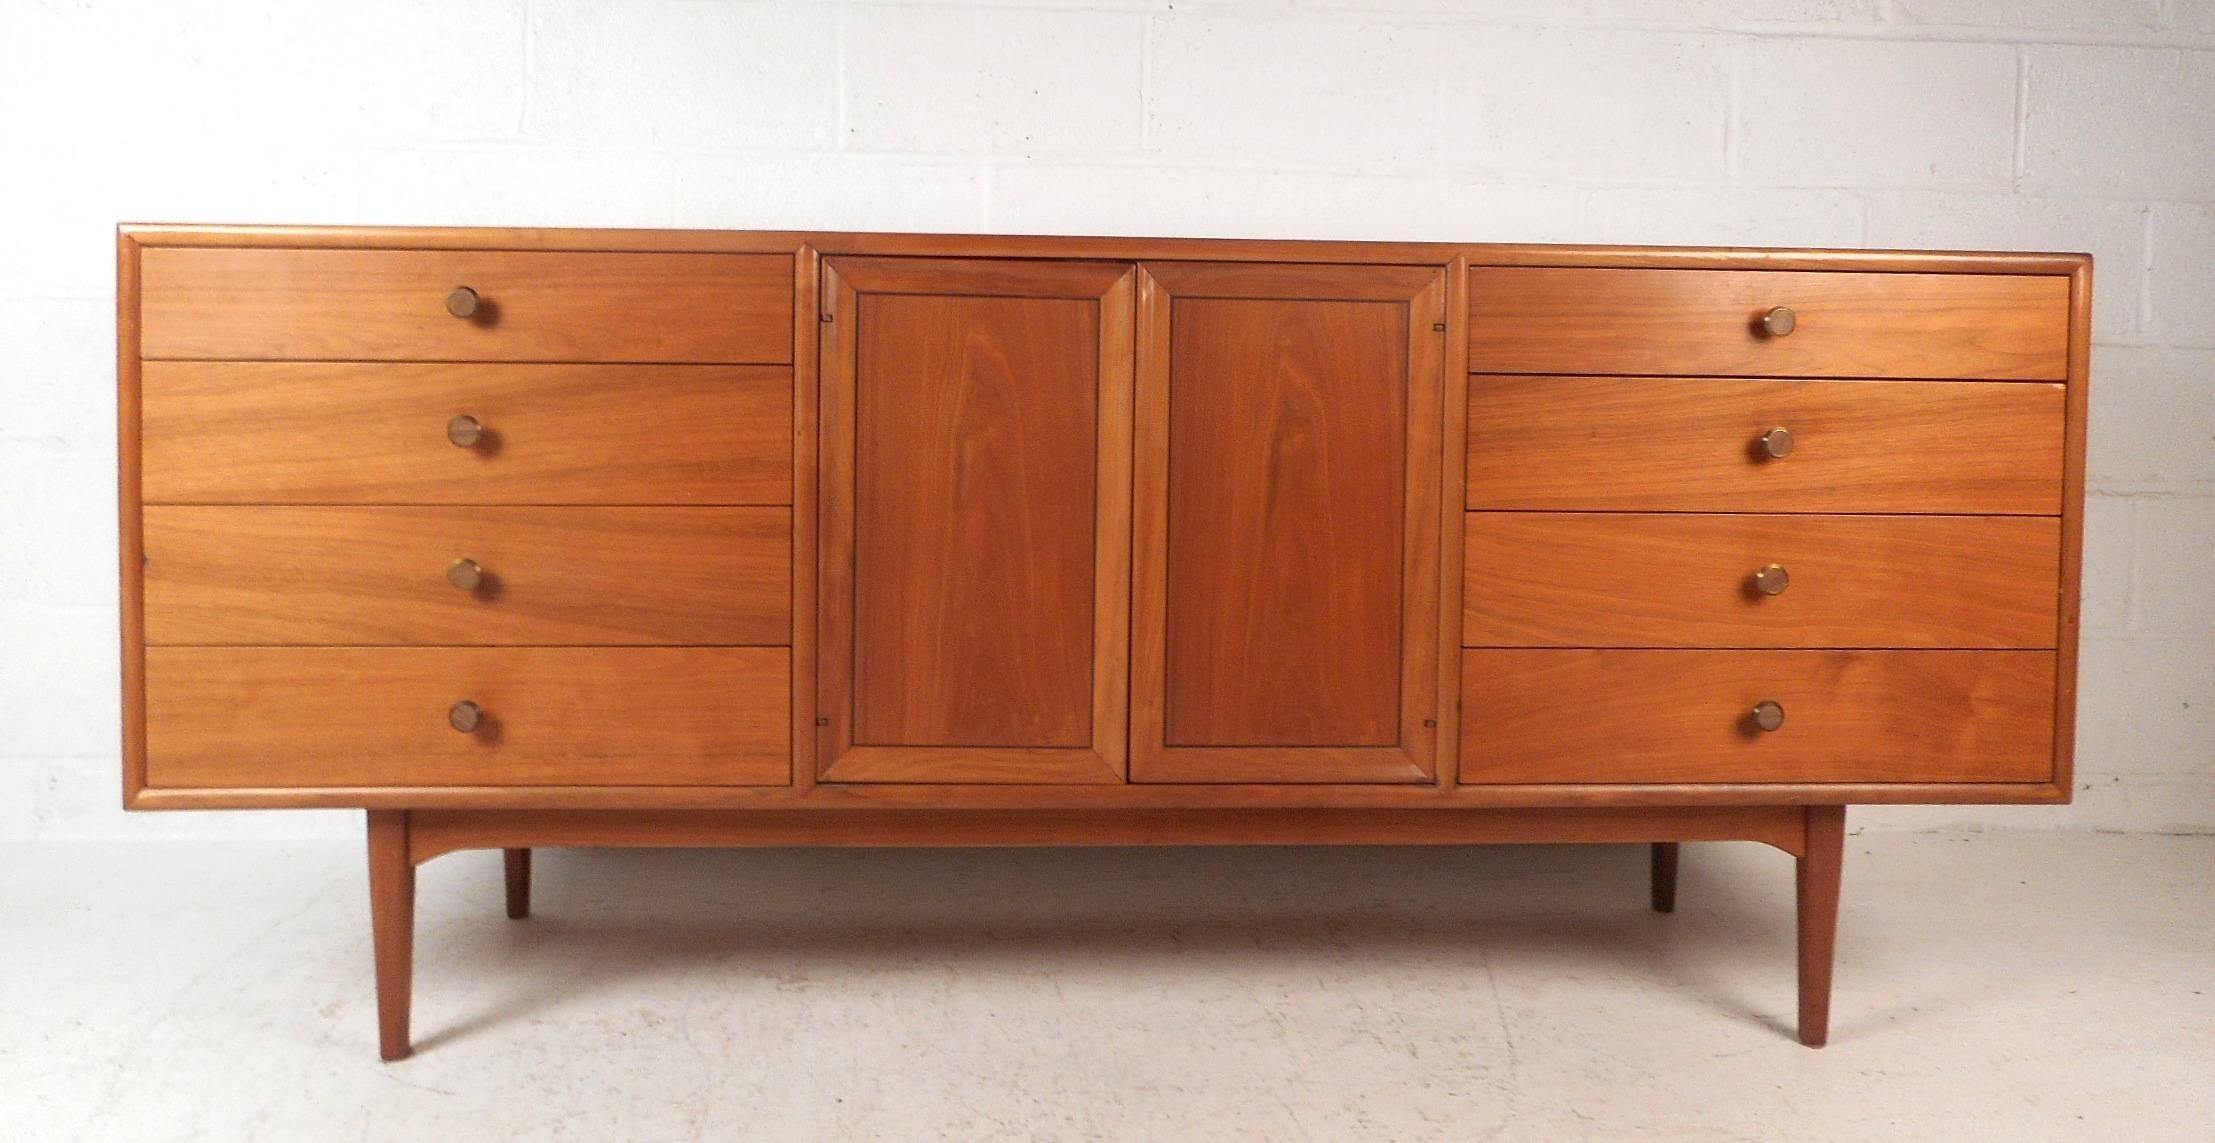 Beautiful vintage modern sideboard by Drexel with eleven hefty drawers for storage. This stunning case piece has unique circular metal pulls with wood fronts. Two cabinet doors with a spring mechanism hide three large drawers in the centre. A